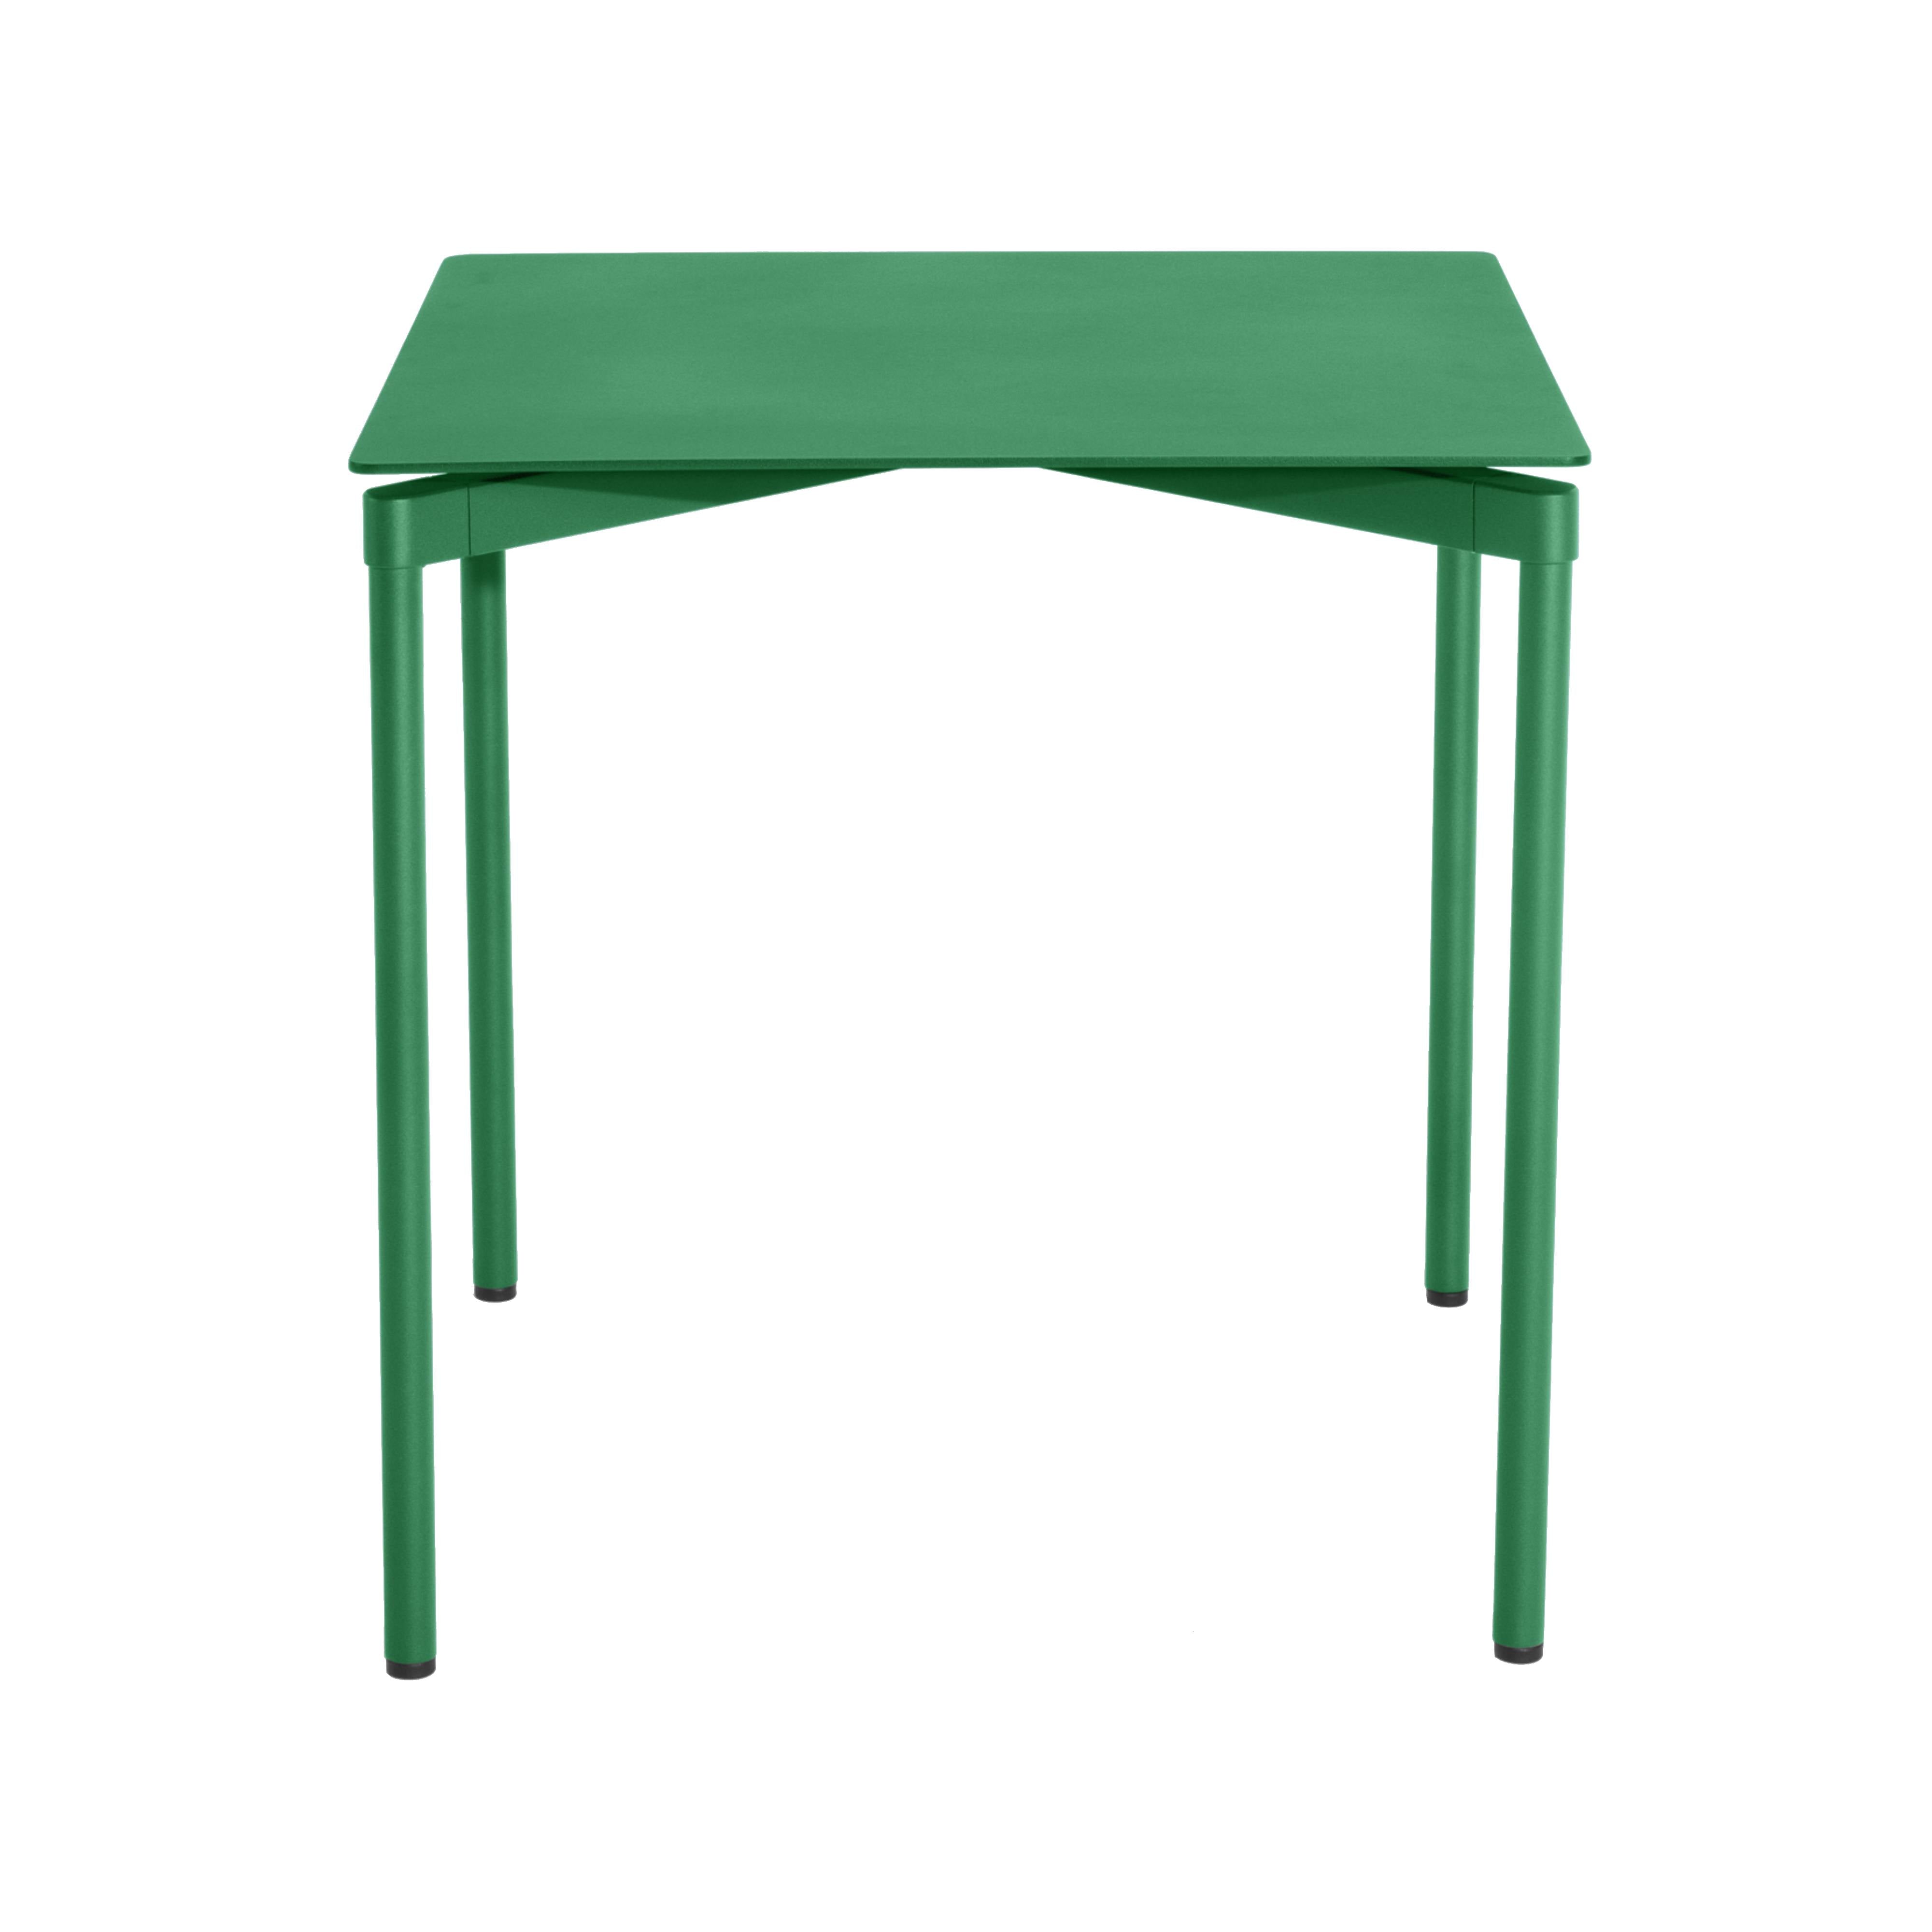 Fromme Dining Table: Outdoor + Square + Mint Green